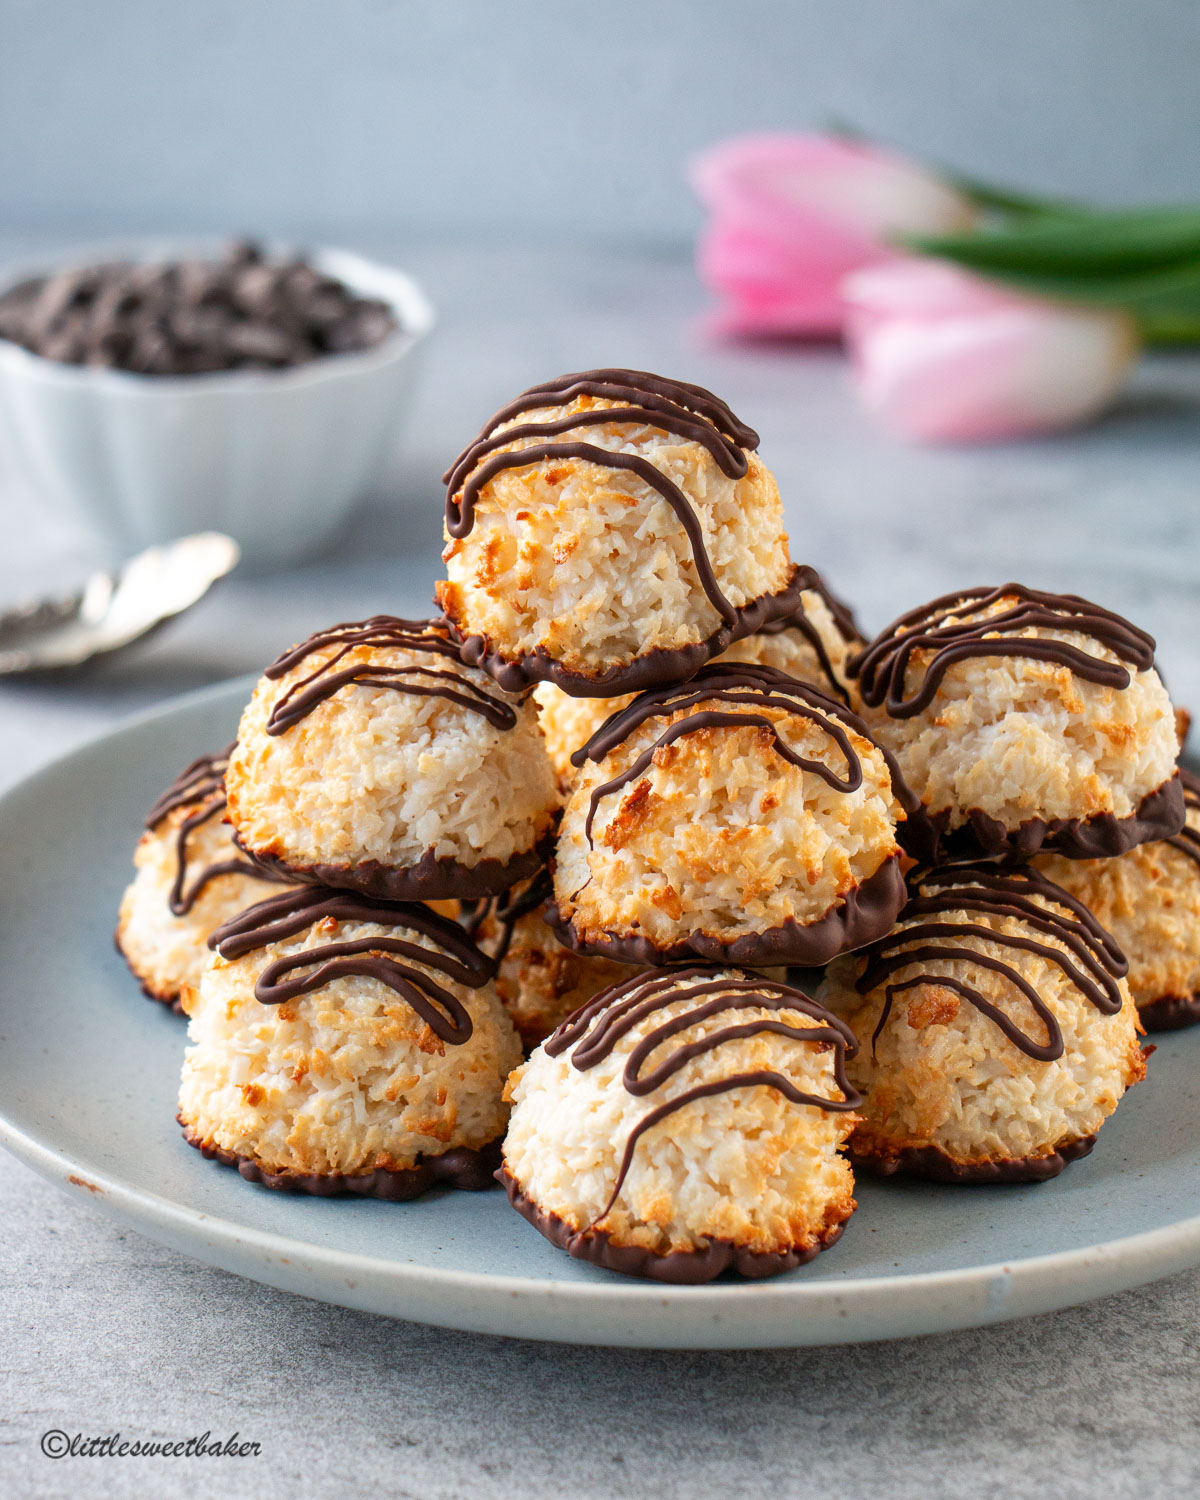 Chocolate dipped coconut macaroons piled on a blue plate